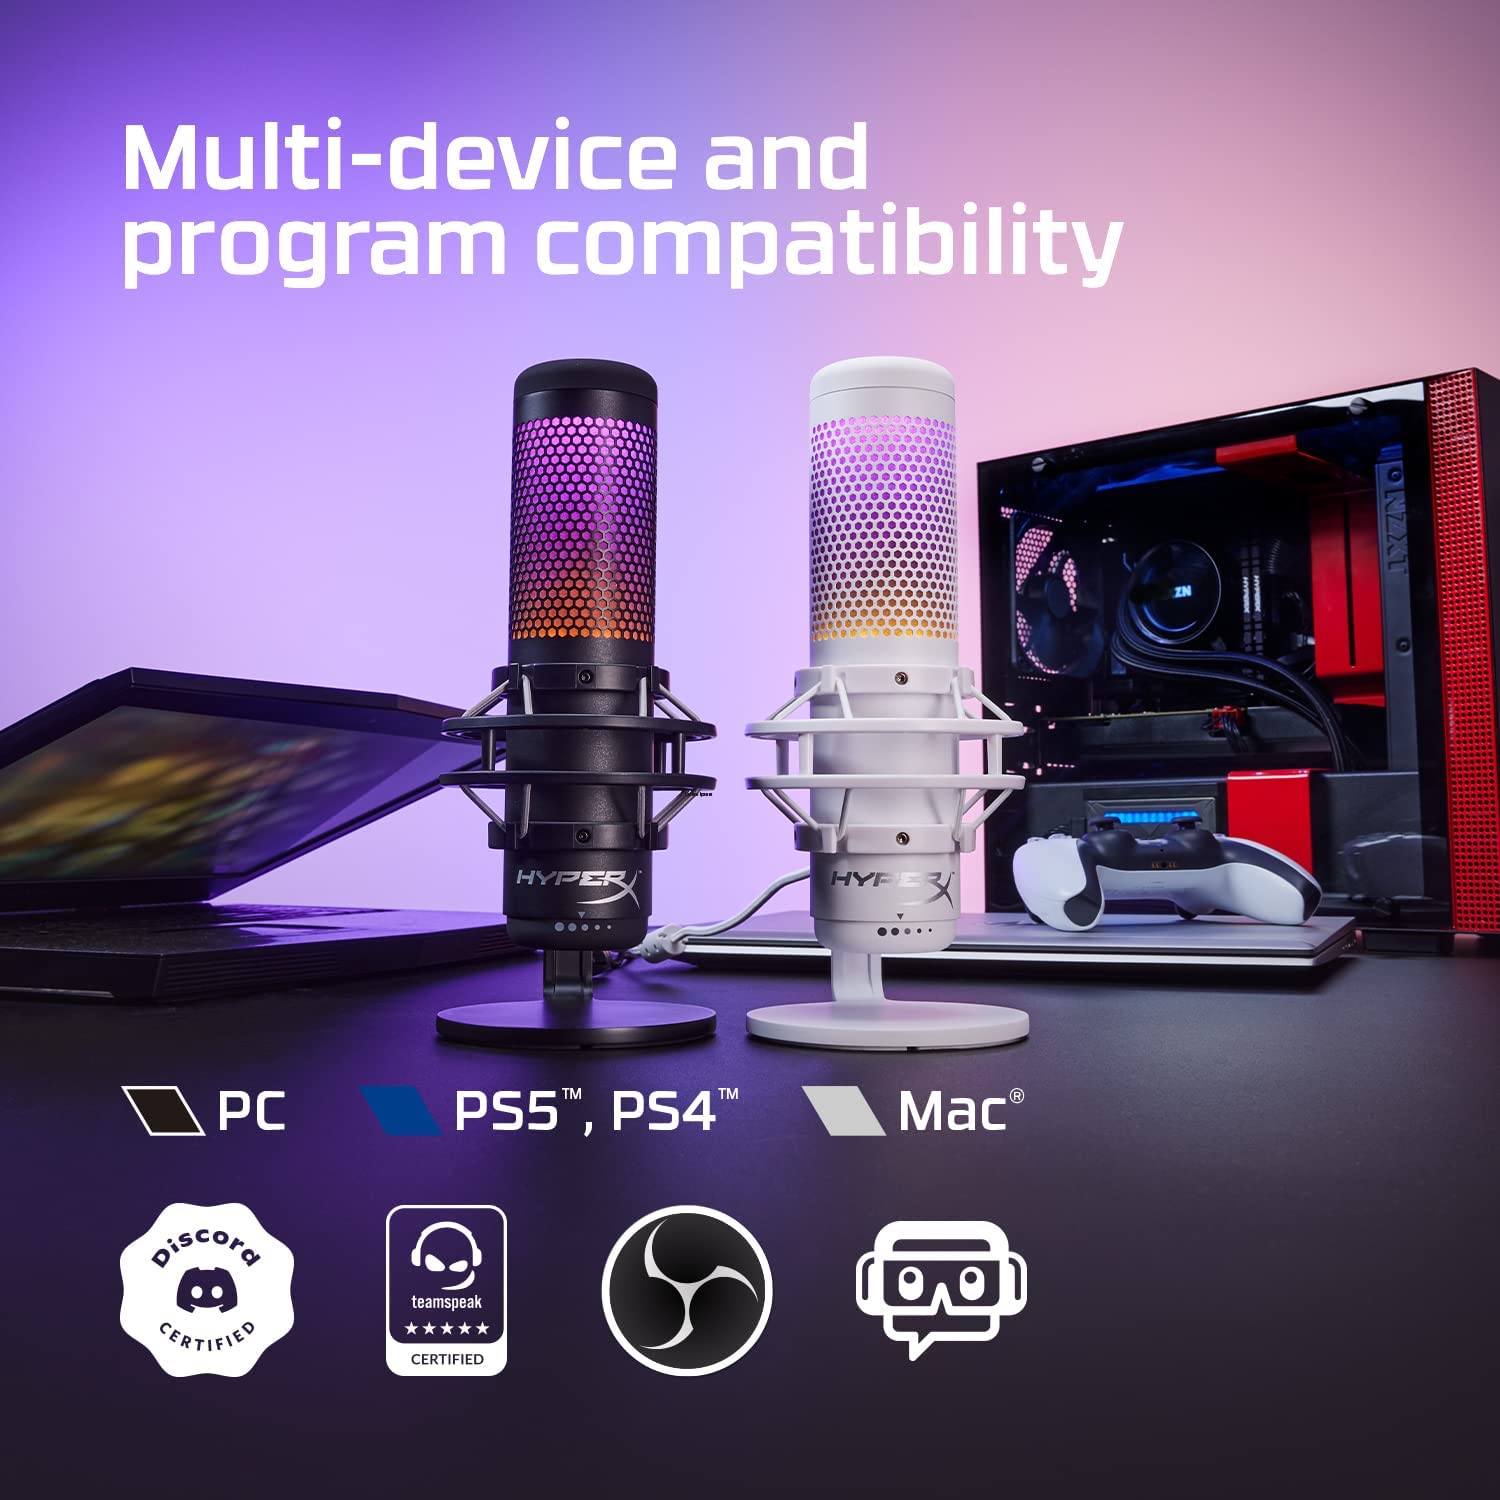 (Open Box) HyperX Quadcast S RGB USB Condenser Omnidirectional Microphone for Pc, Ps4 and Mac, Gaming, Streaming, Podcasts, Twitch, YouTube, Discord (Hmiq1S-Xx-Rg/G, Black) Grade - A+